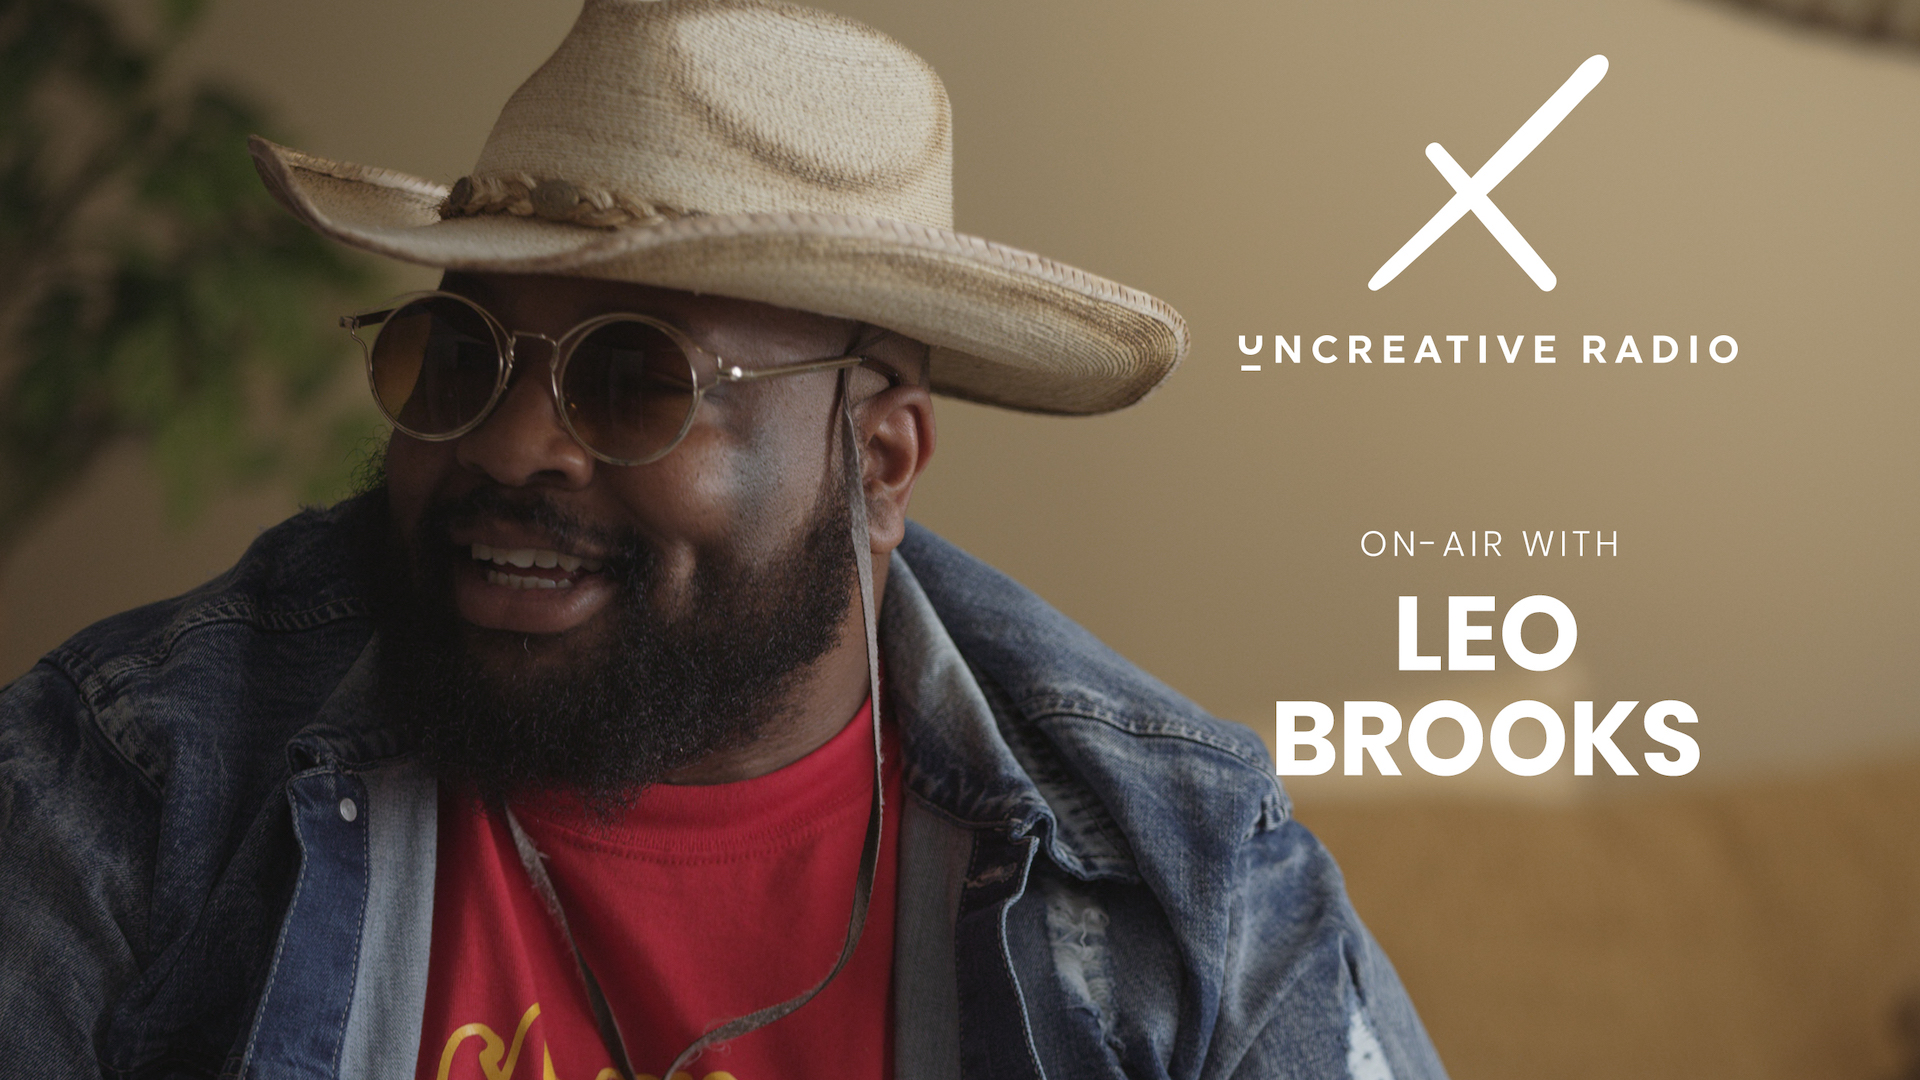 IU C&I Studios Page and Post Uncreative Radio with Leo Brooks title with bearded man wearing shades and beige cowboy hat along with jean jacket and red t shirt smiling looking off to the side